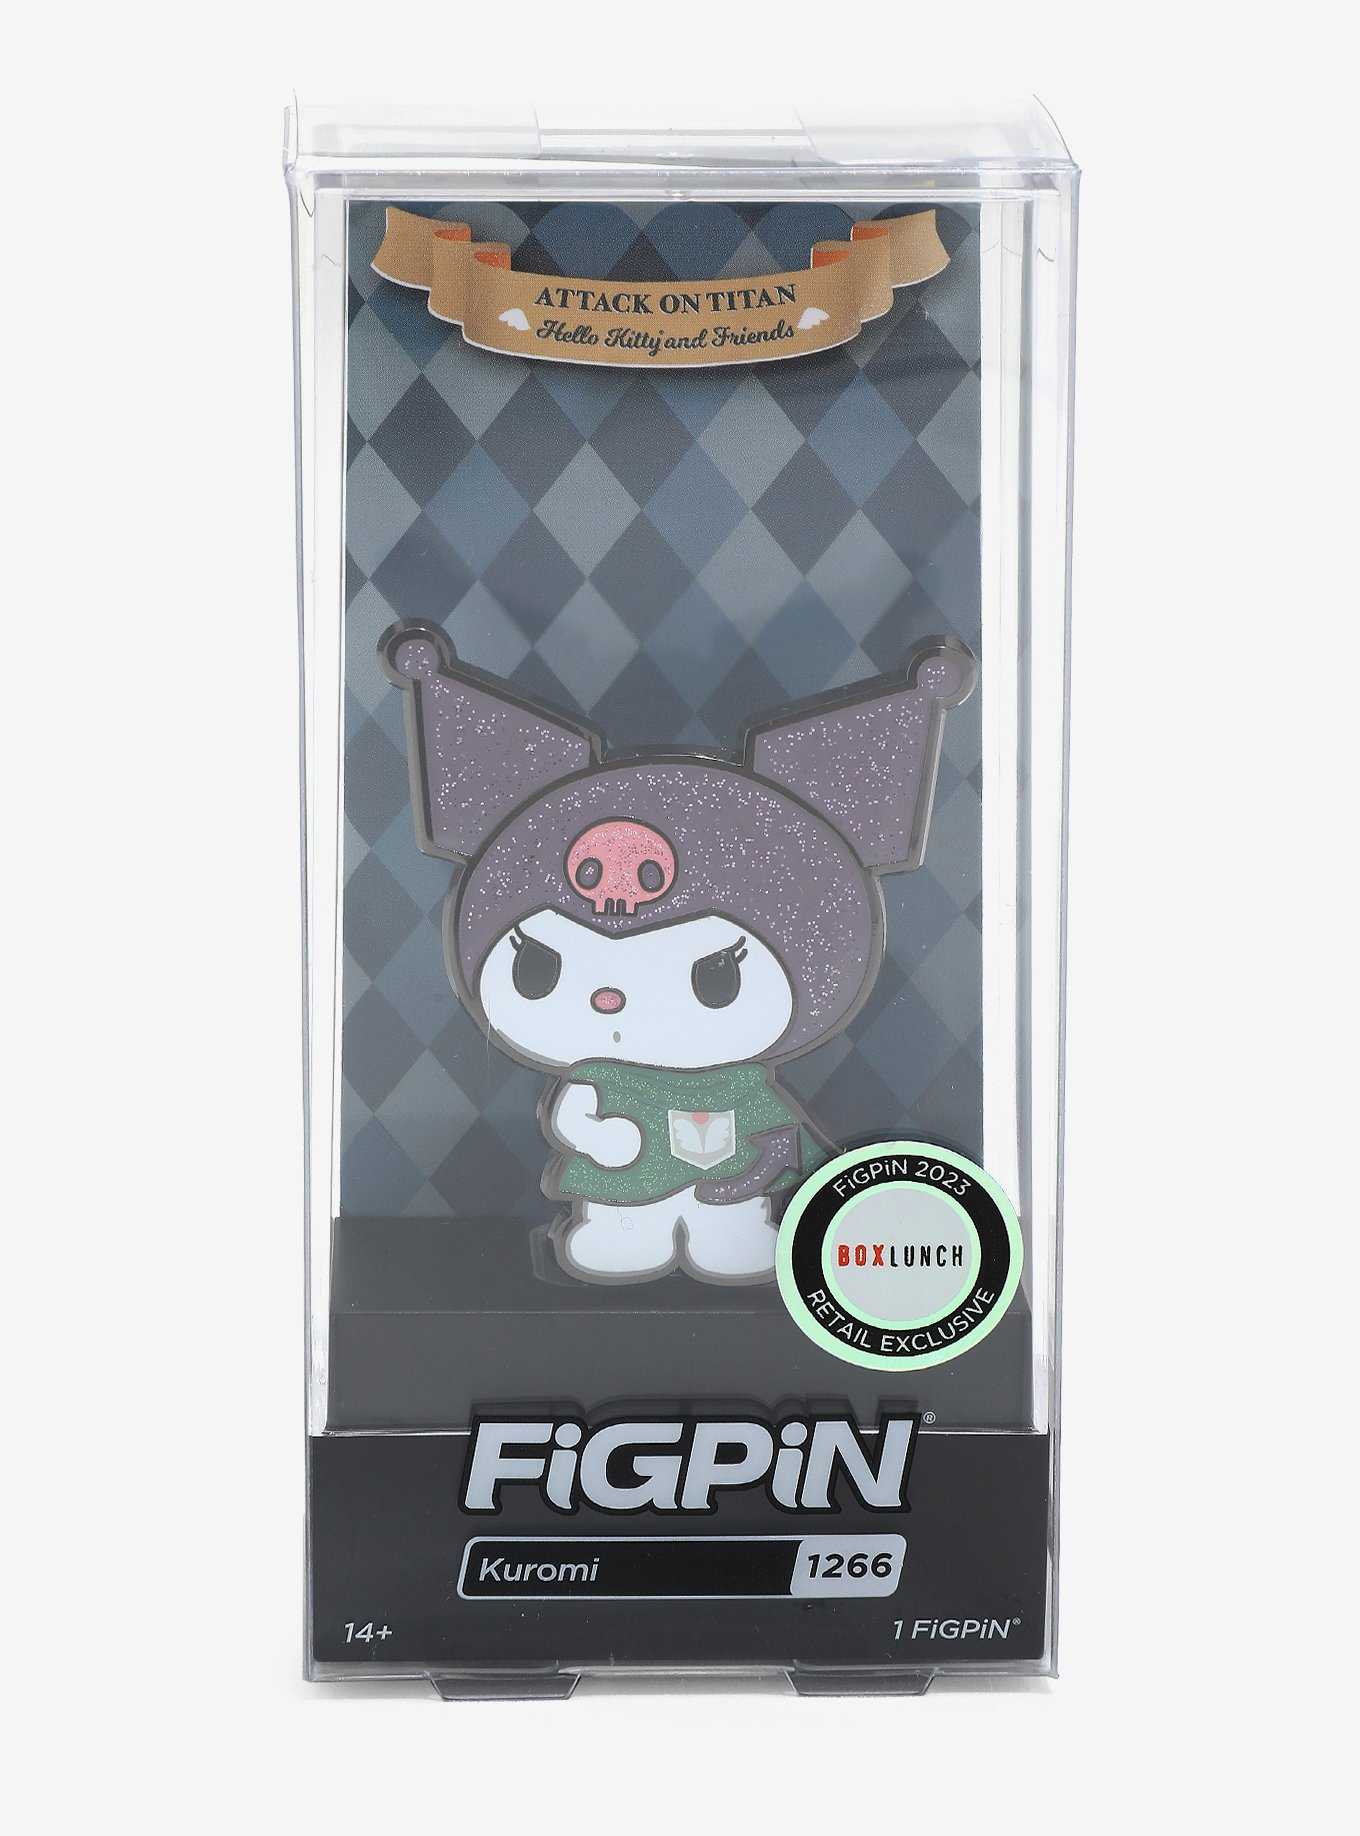 FigPin Sanrio Hello Kitty and Friends x Attack on Titan Kuromi Enamel Pin - BoxLunch Exclusive, , hi-res